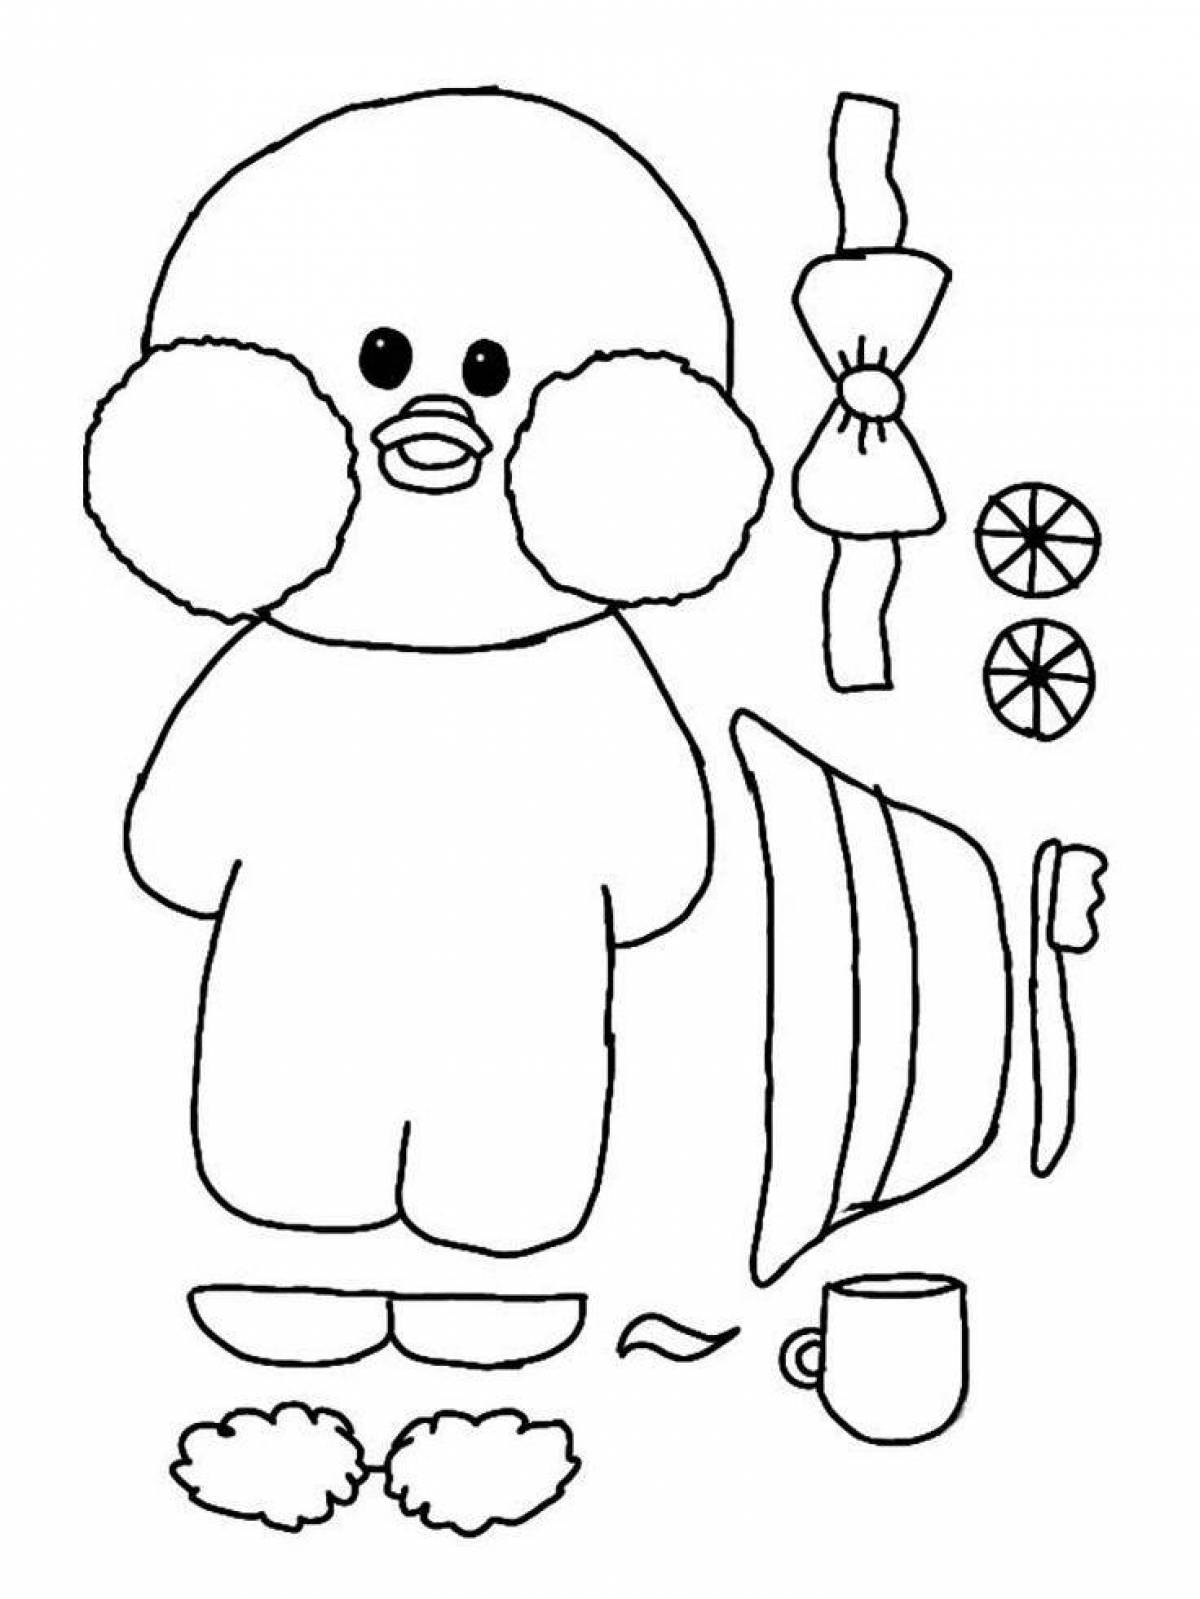 Colorful lalaphan duck coloring page for kids